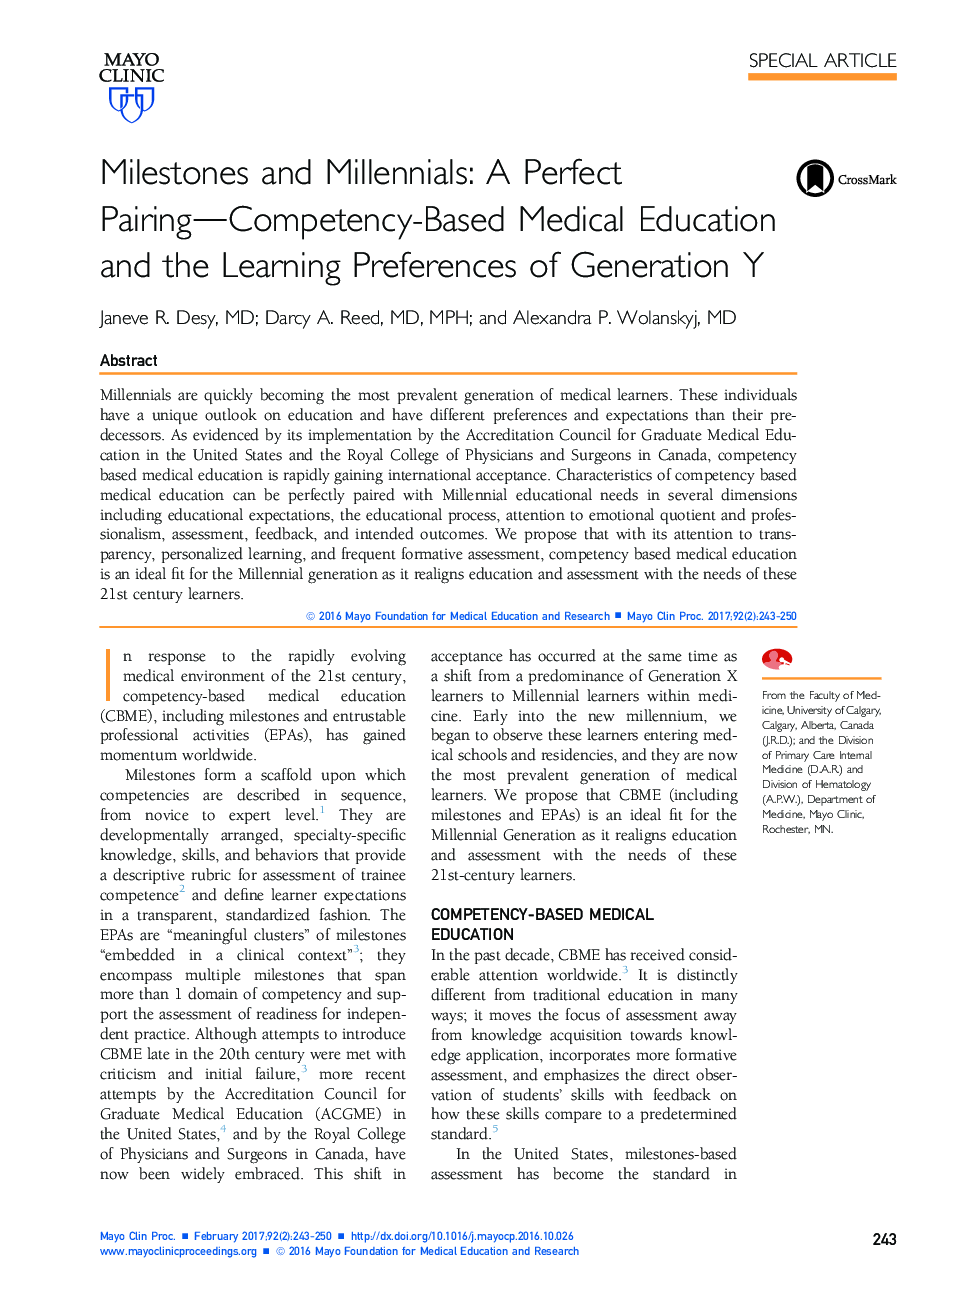 Milestones and Millennials: A Perfect Pairing-Competency-Based Medical Education and the Learning Preferences of Generation Y